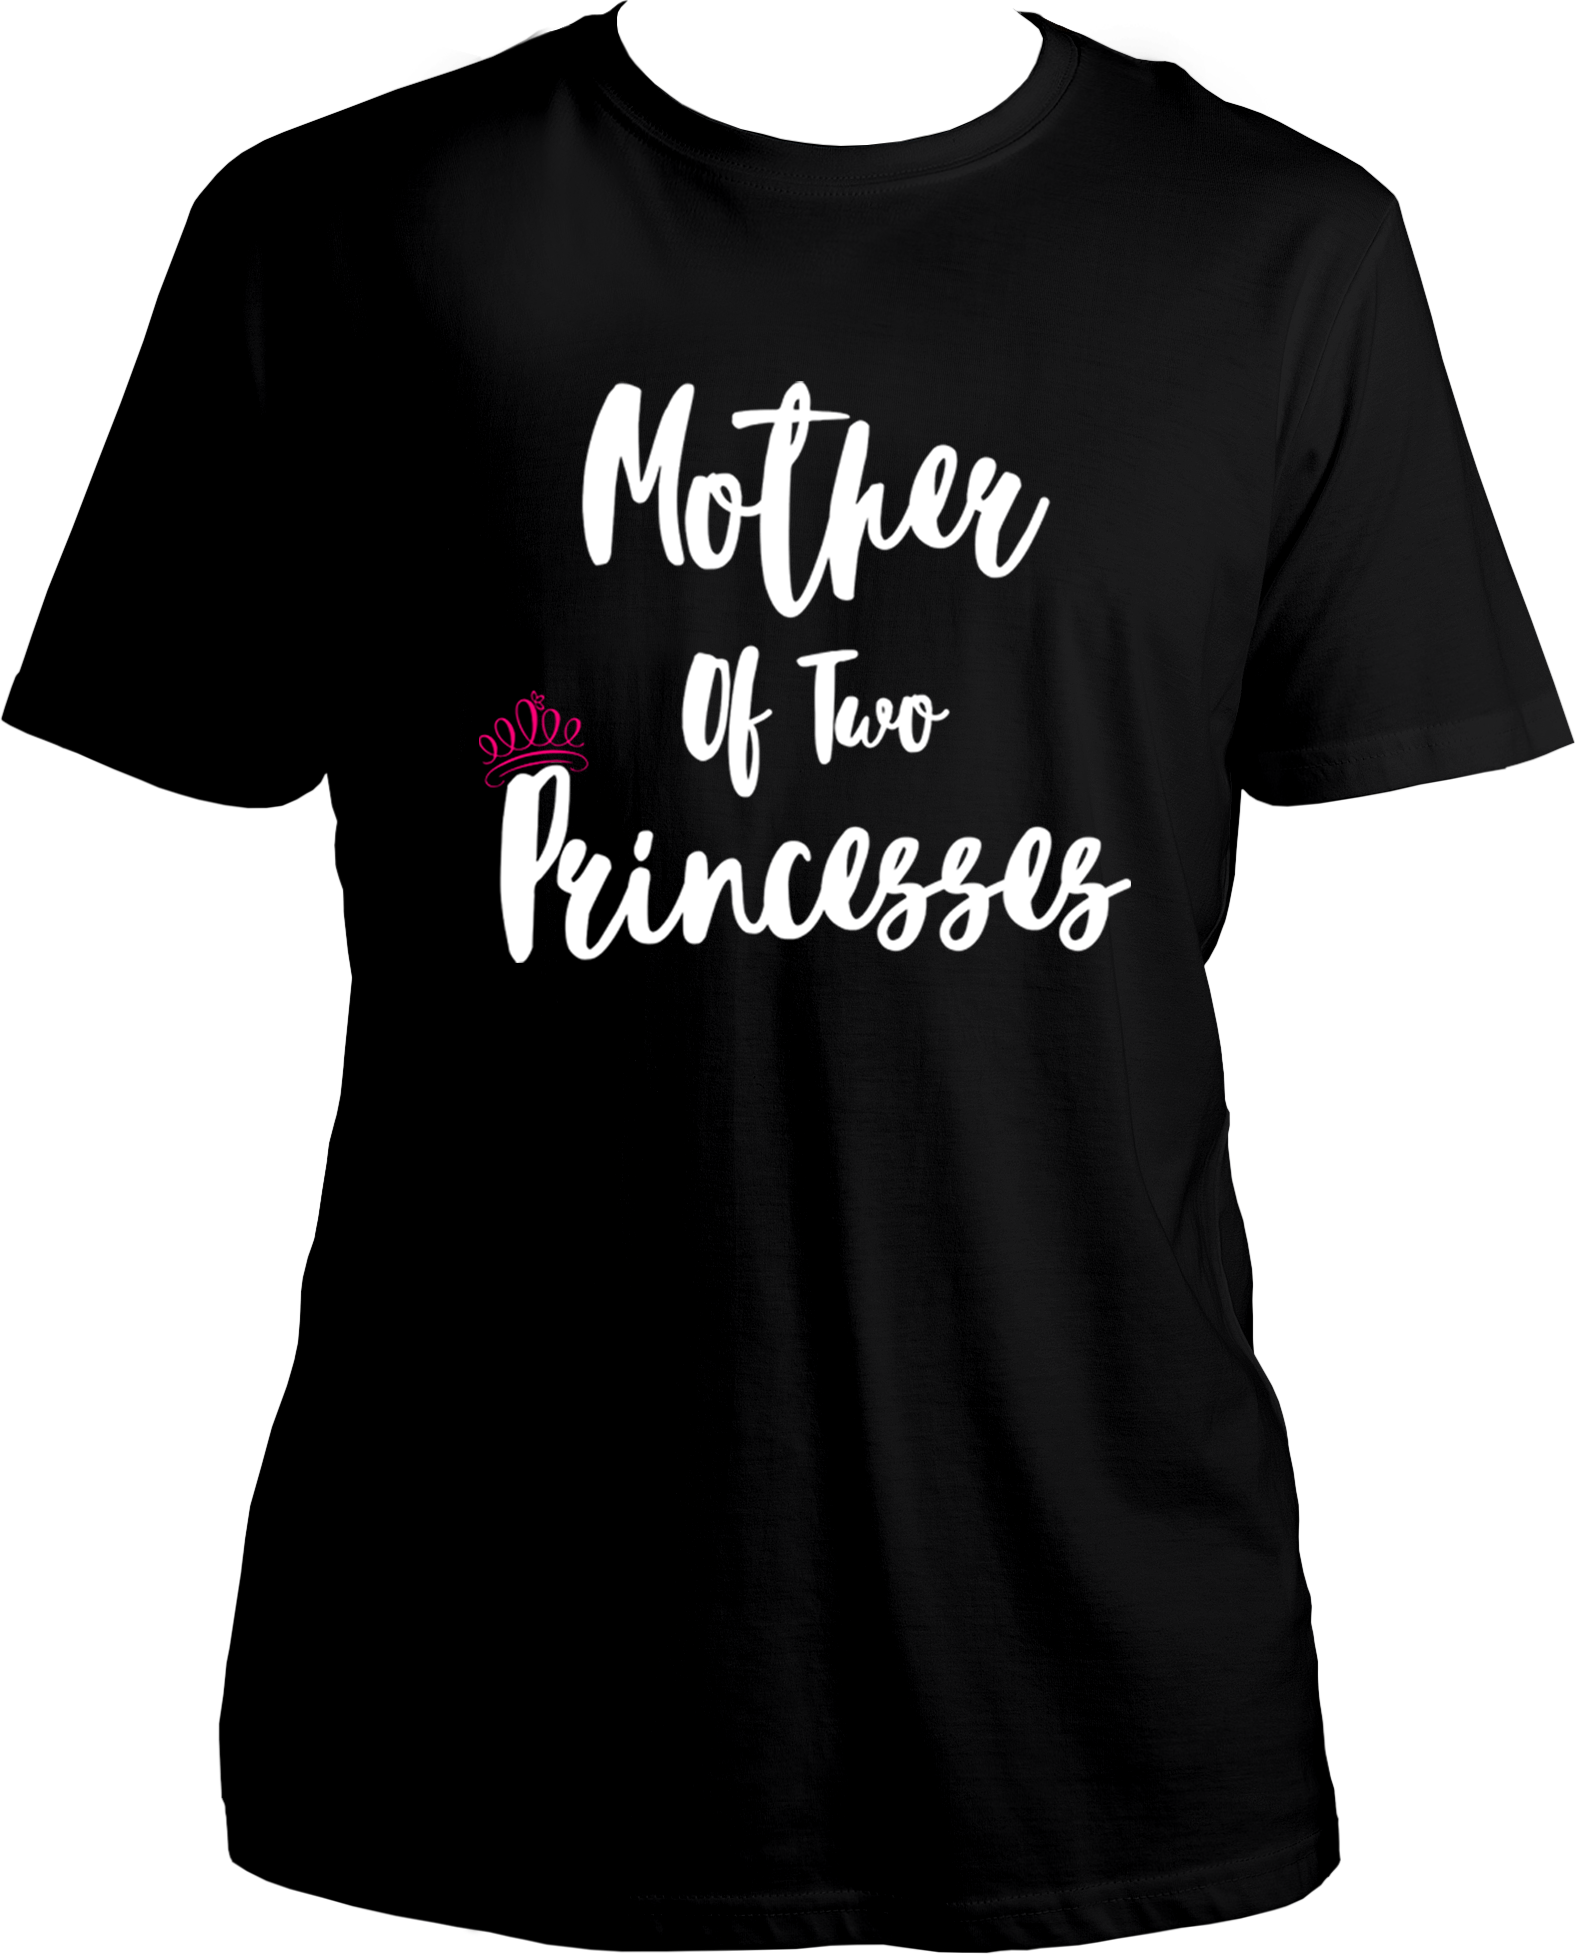 Show your love for the moms in your life with this special Mother Of A Princess Unisex T-Shirt! It's the perfect way to celebrate and honor moms on this Mother's Day. With a unique design made specifically for moms of princesses, it's sure to bring a smile to any mom's face. Family t-shirts from Garrari